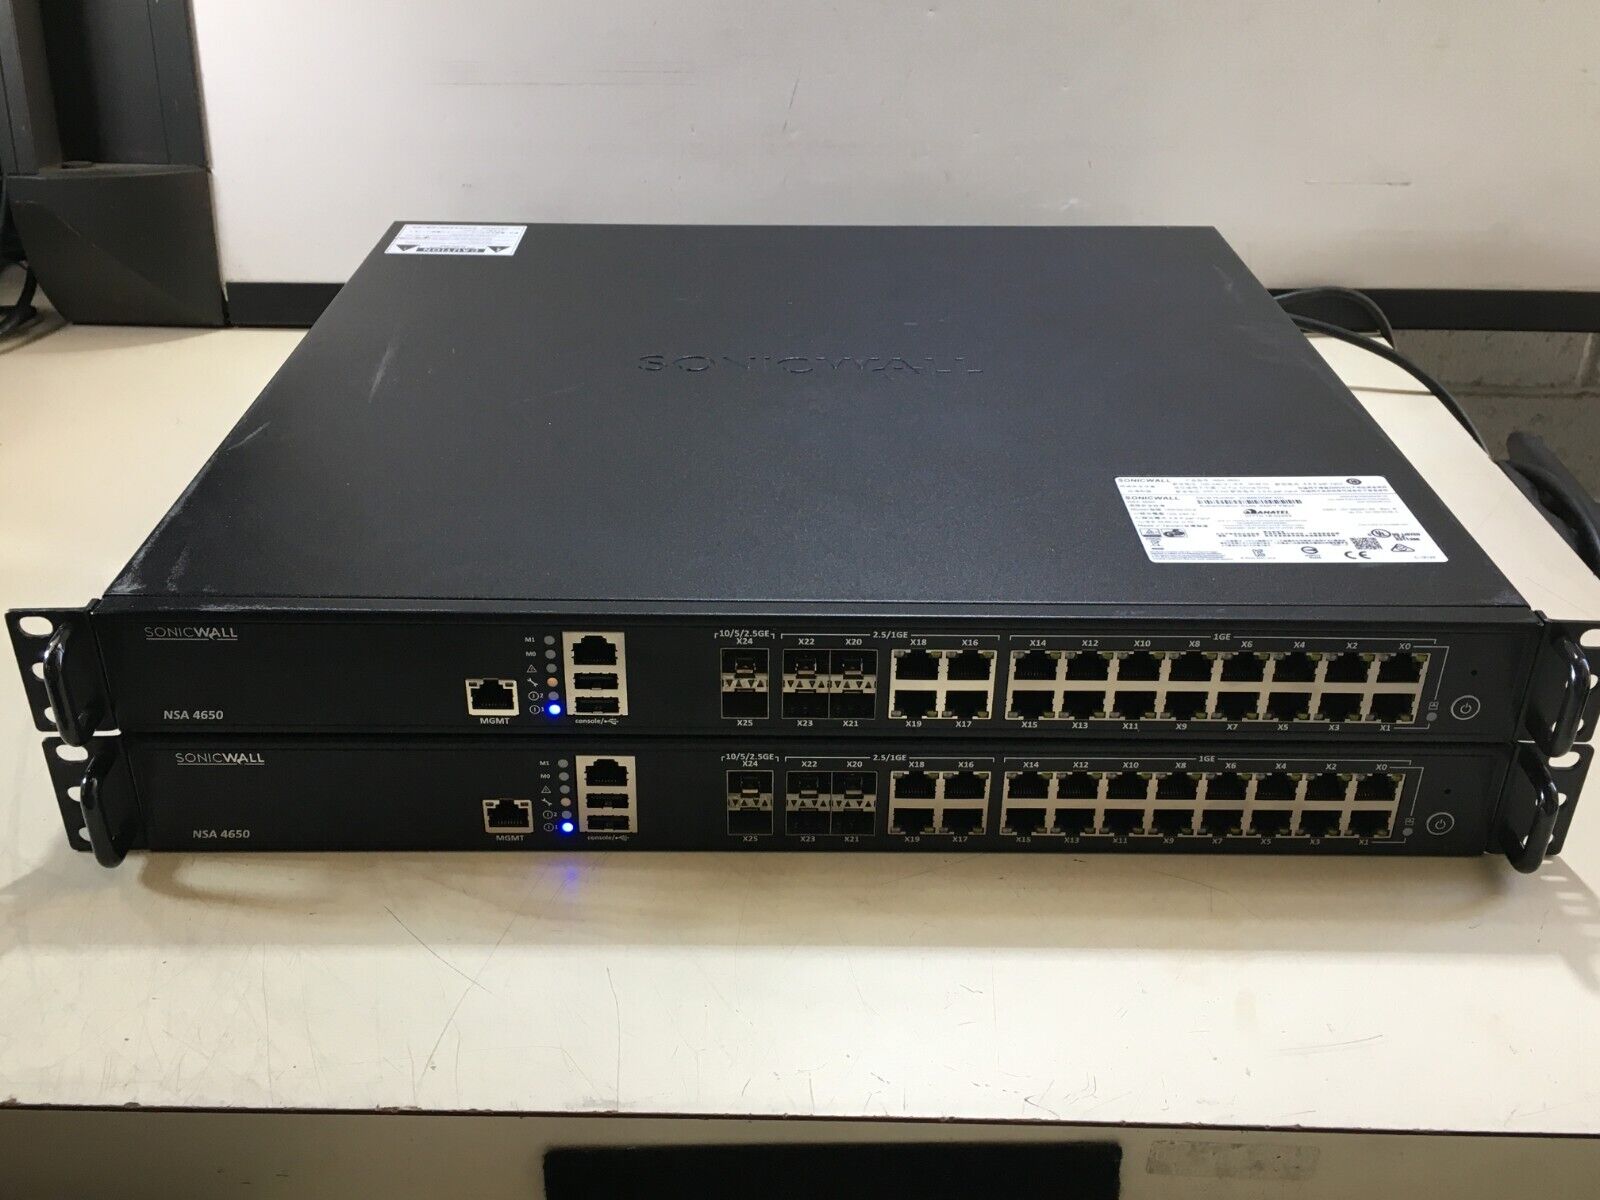 LOT OF 2:  SONICWALL NSA 4650 NETWORK SECURITY FIREWALL APPLIANCE - AS IS